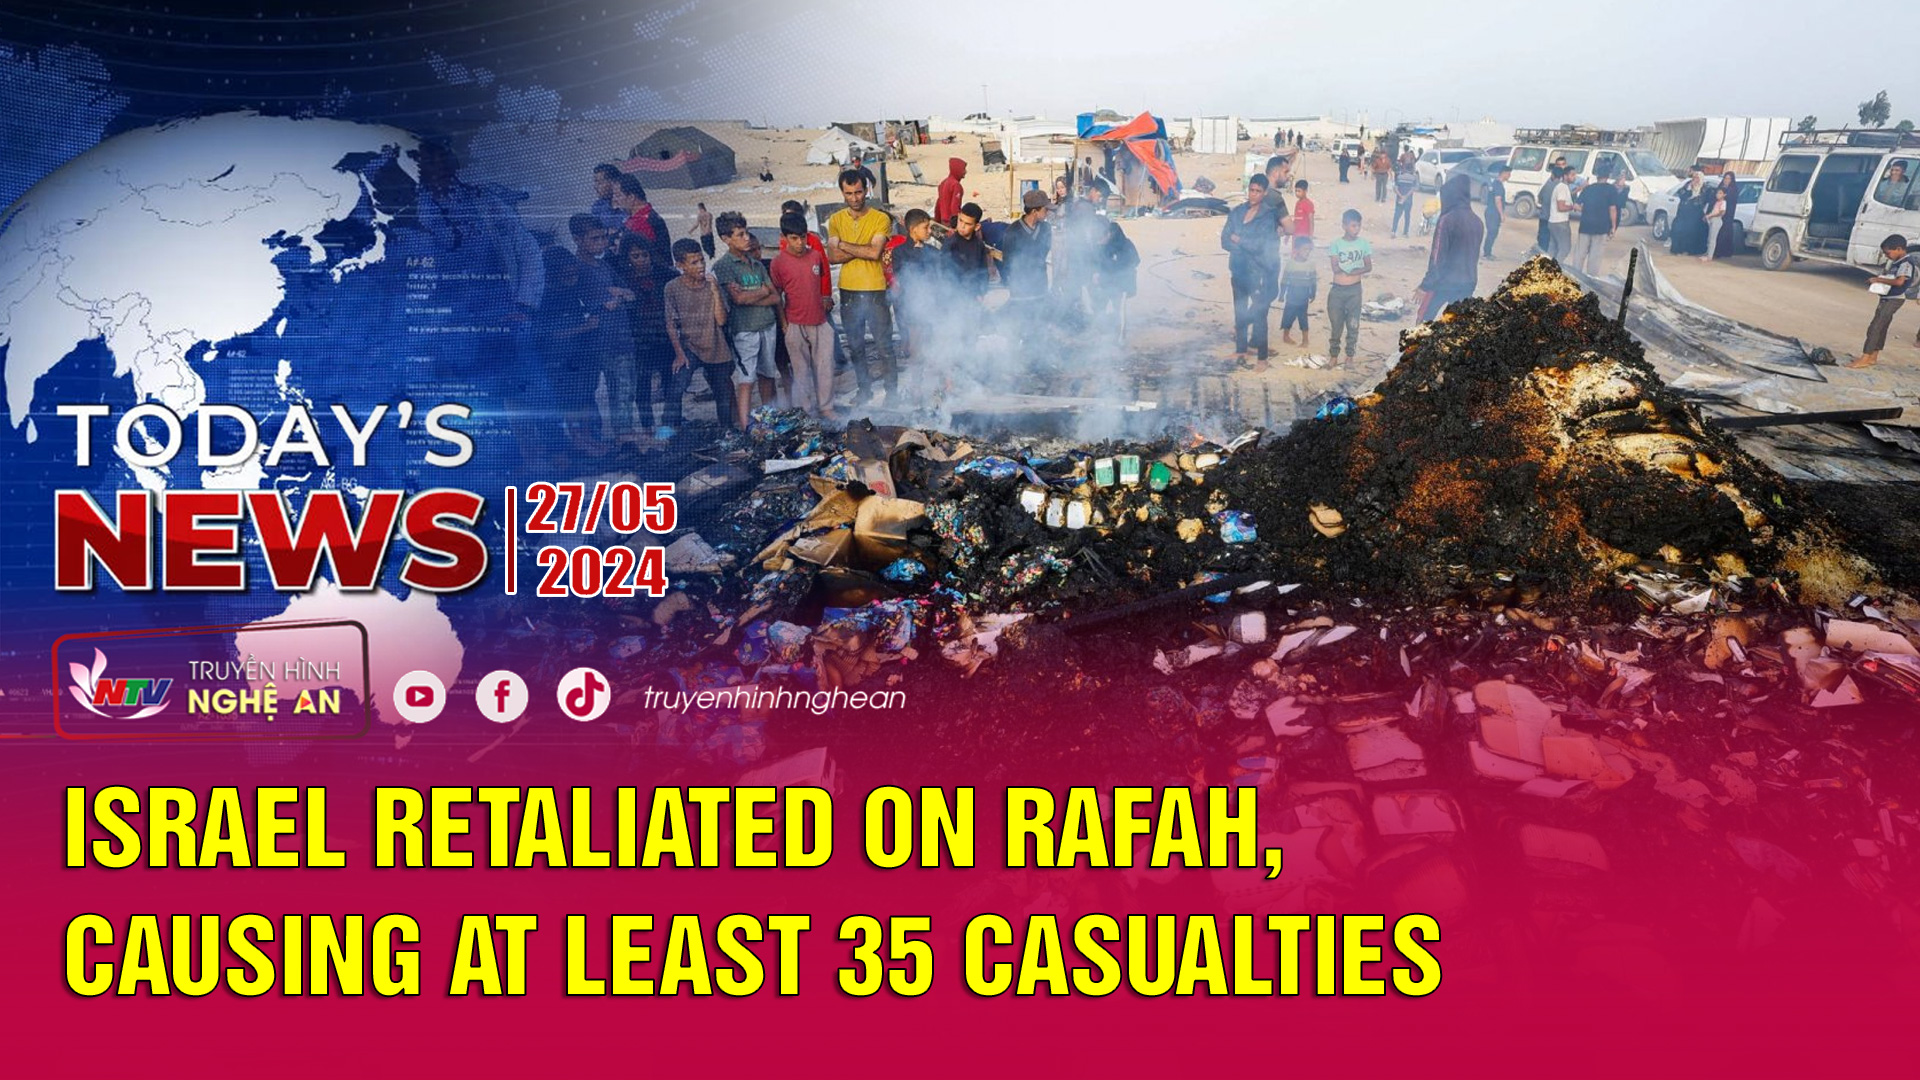 Today's News 27/5/2024: Israel retaliated on Rafah, causing at least 35 casualties